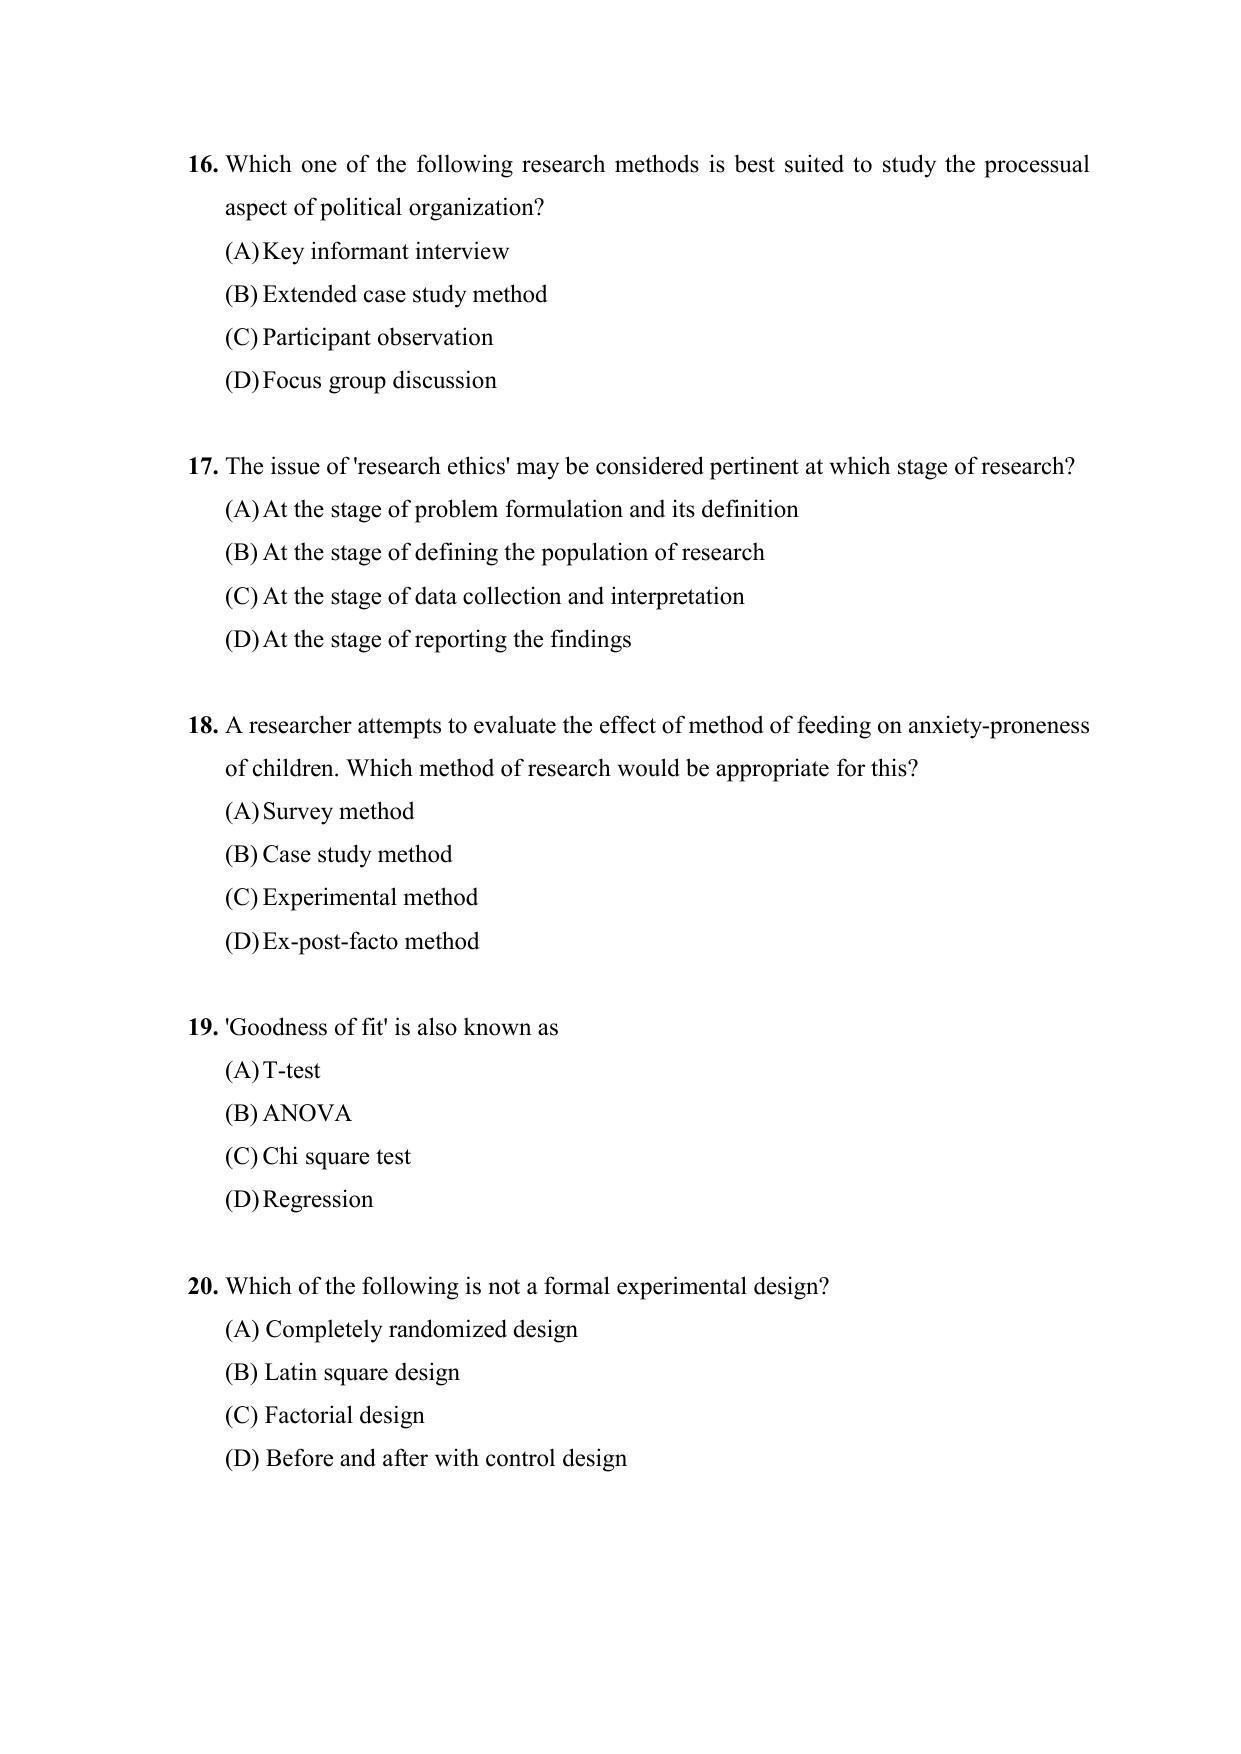 PU MPET Anthropology 2022 Question Papers - Page 4